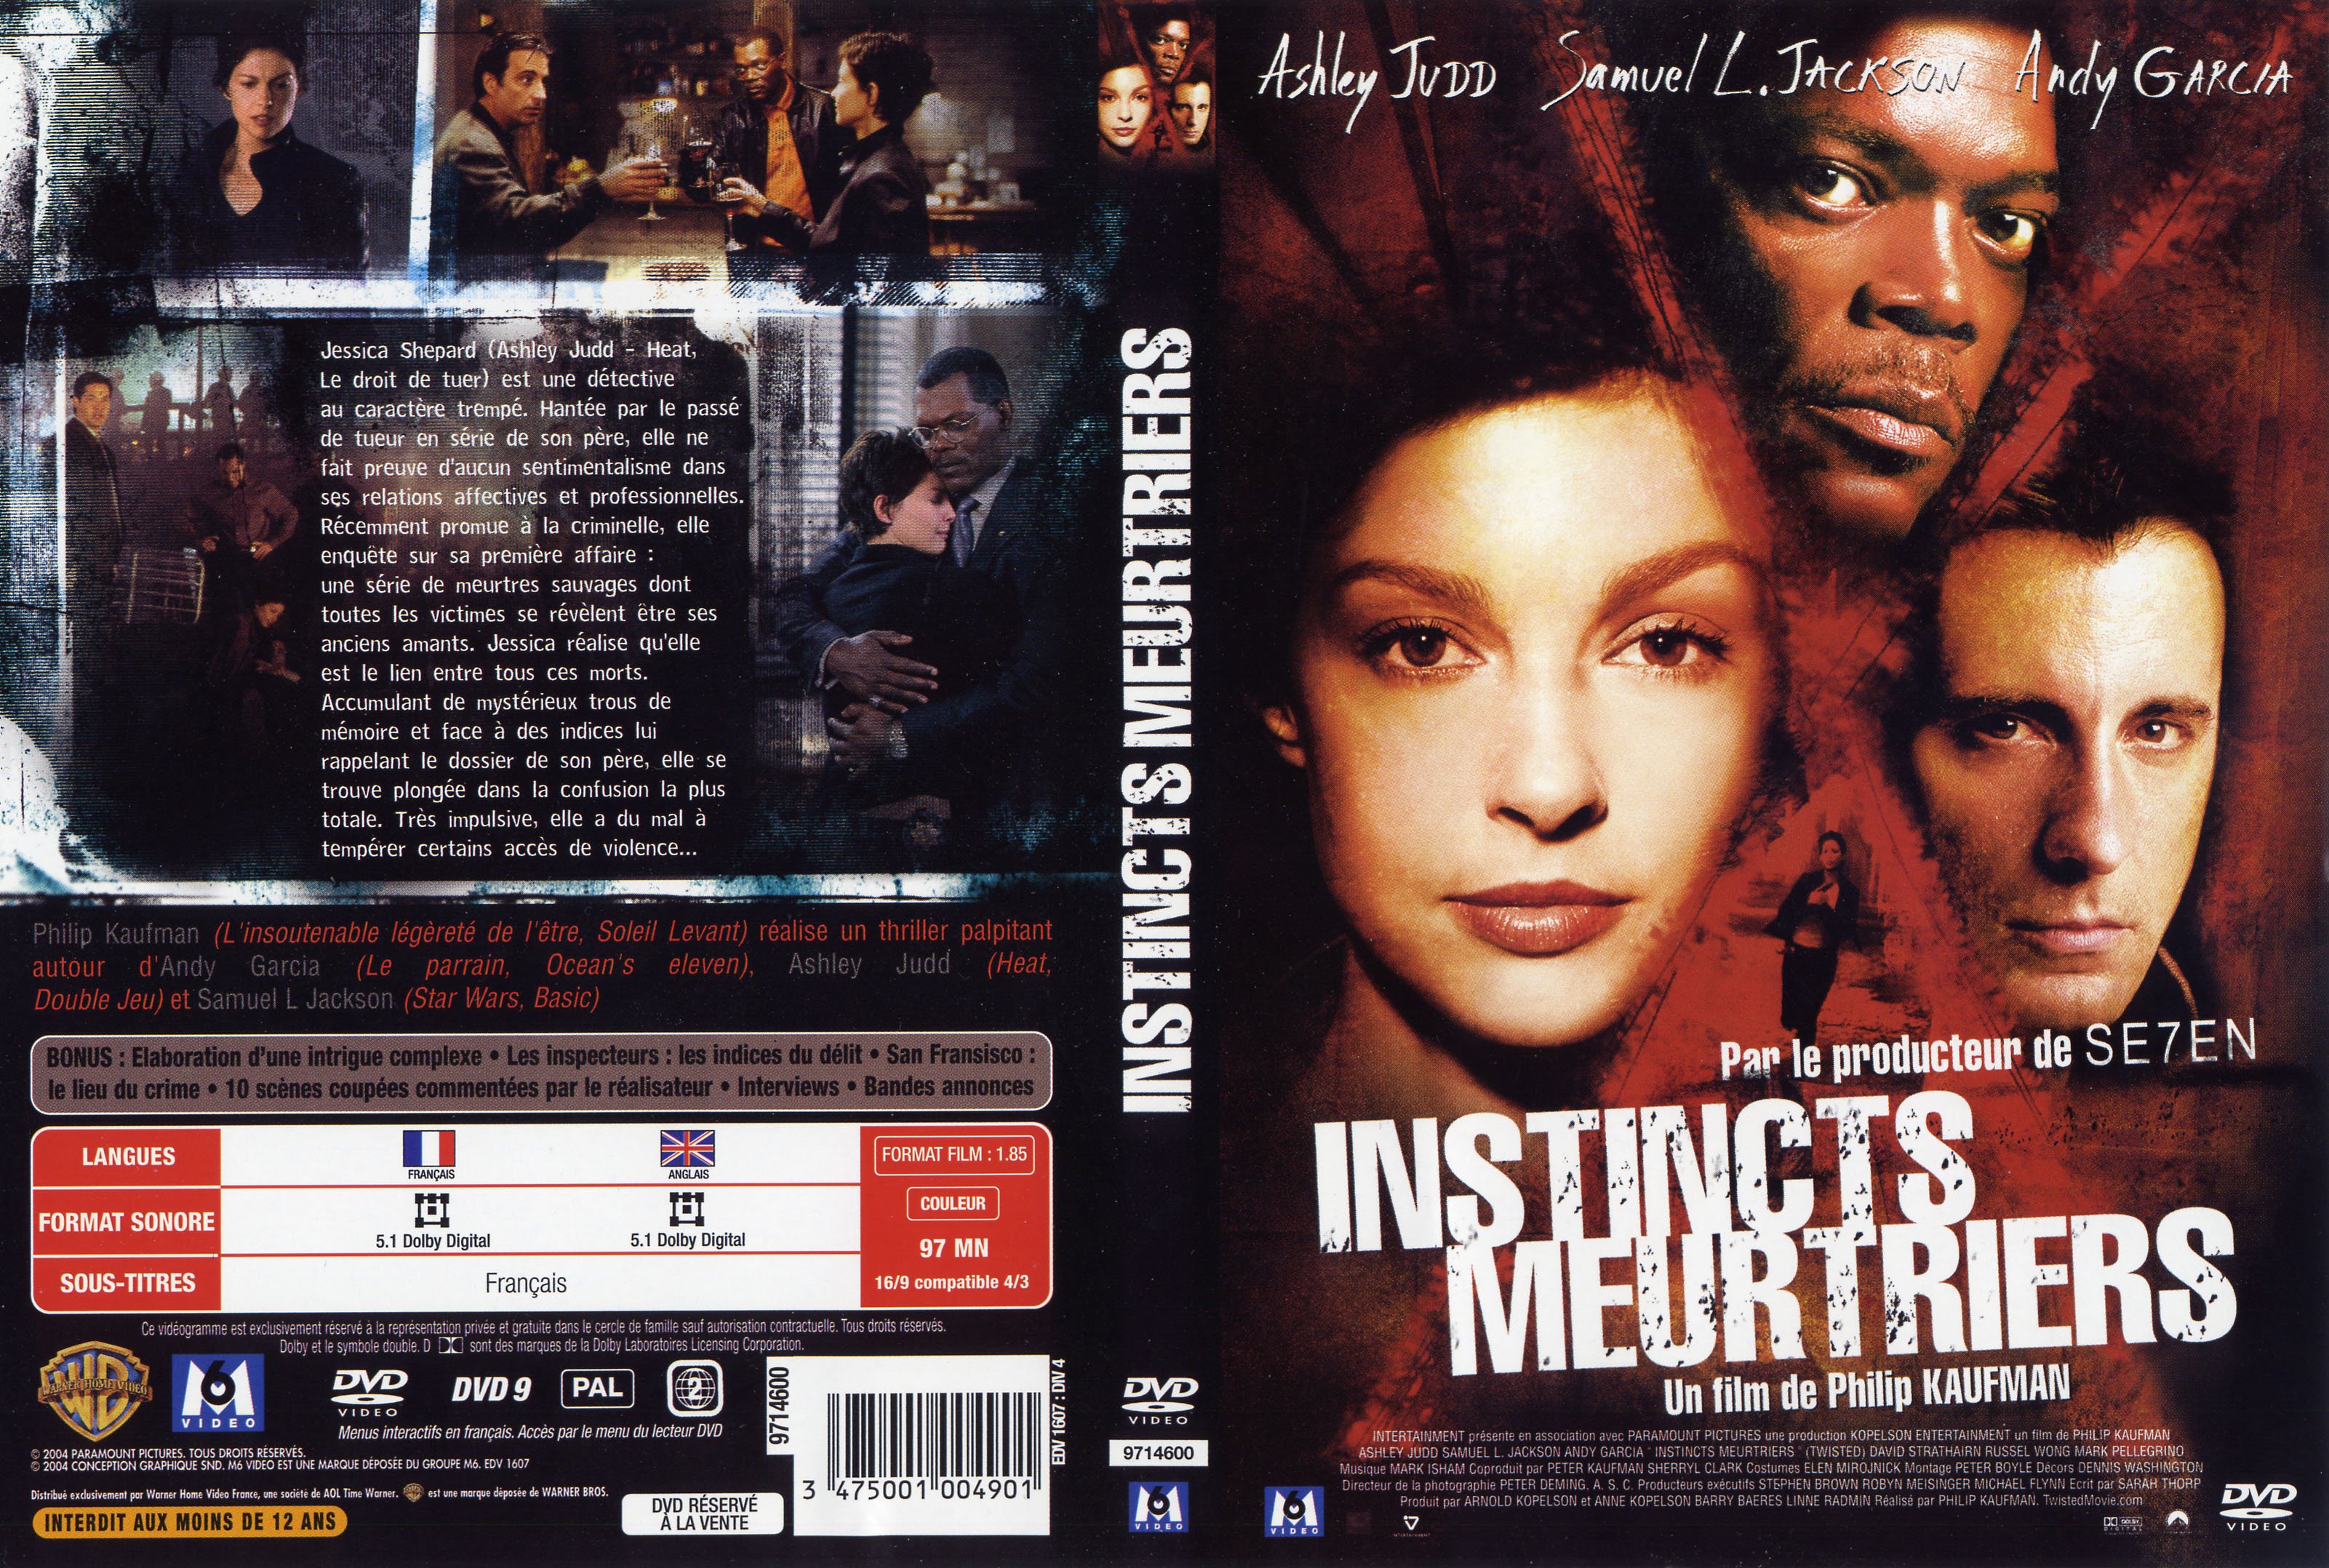 Jaquette DVD Instincts meurtriers